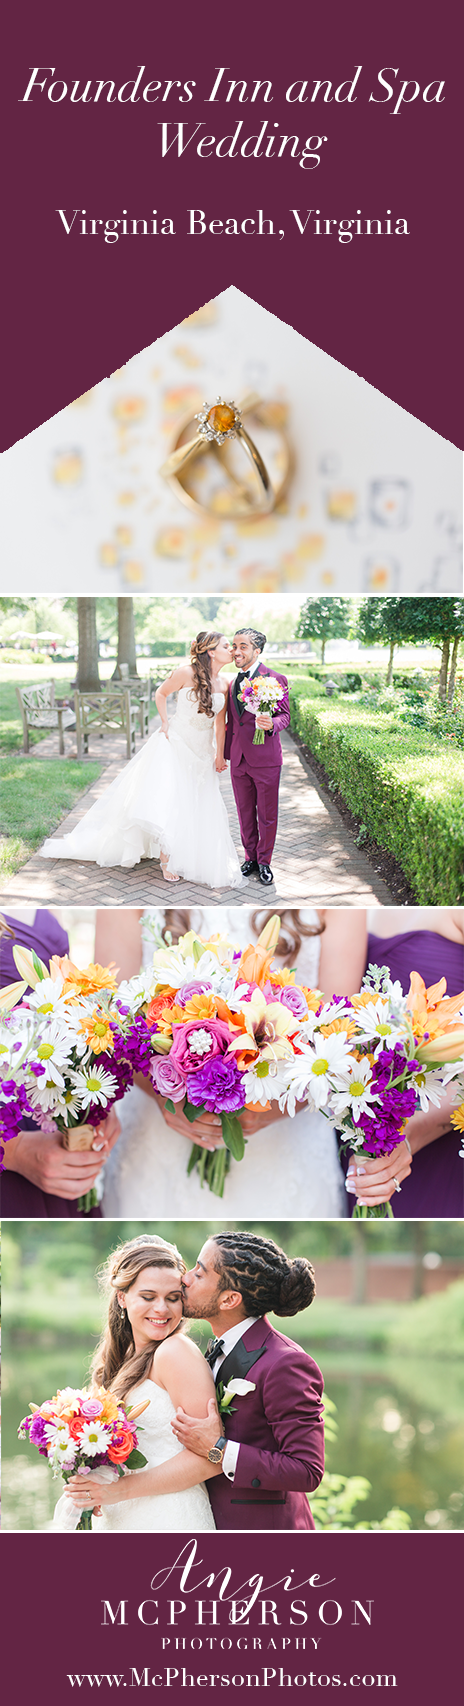 Disney Themed Founders Inn and Spa Wedding by Angie McPherson Photography